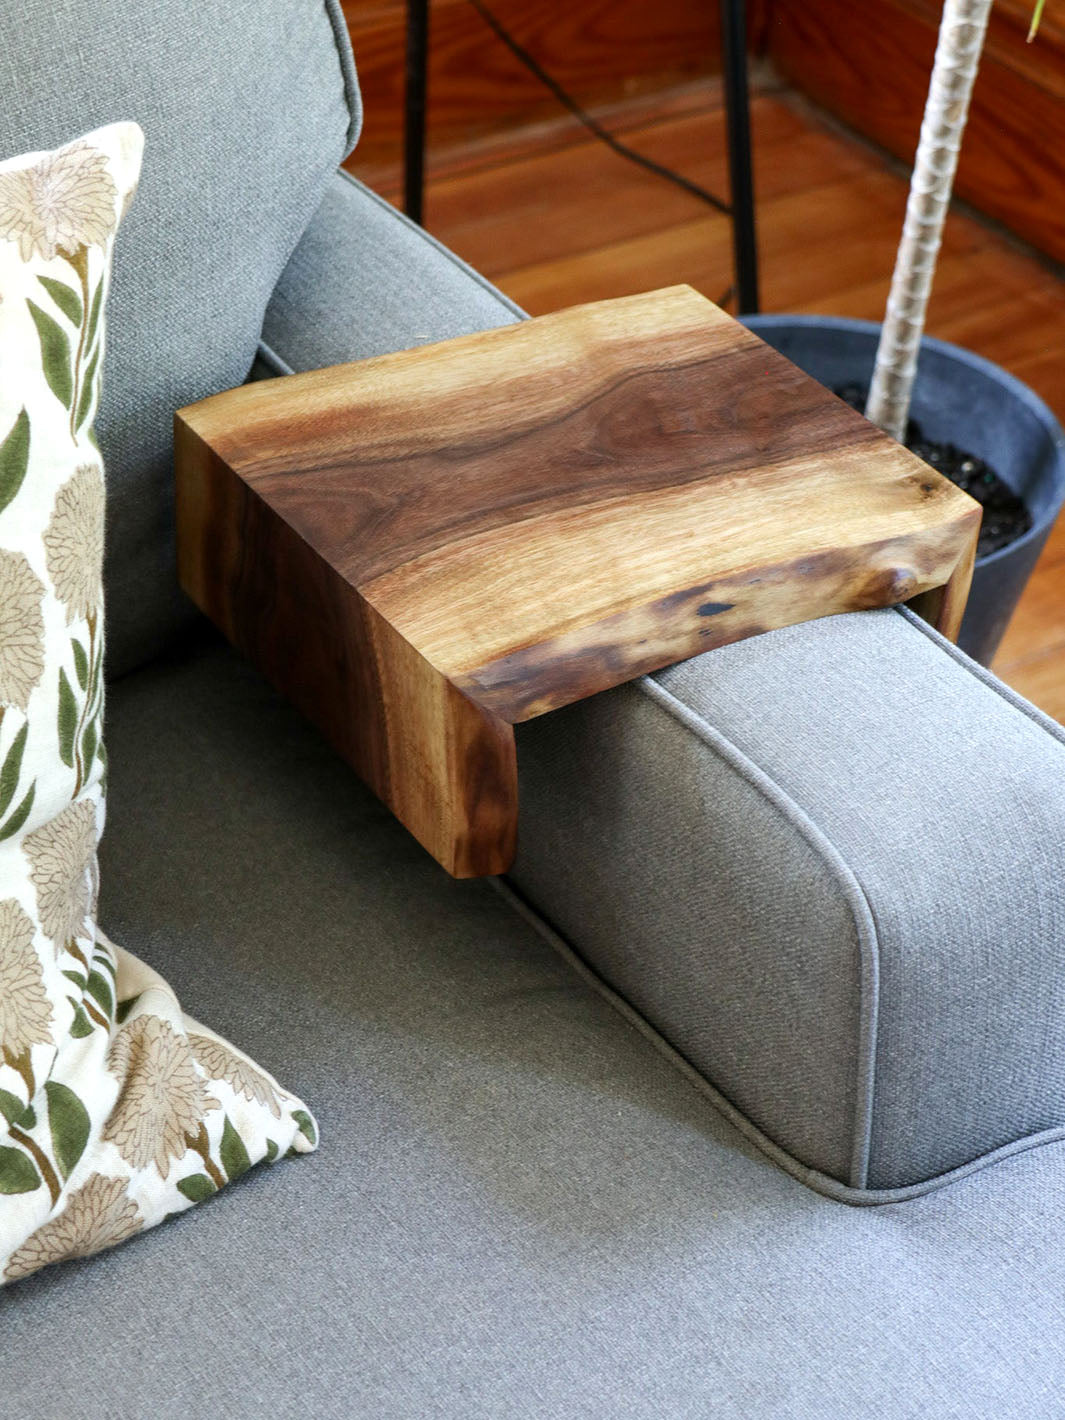 Pair of Live Edge 8" Walnut Wood Armrest Tables (in stock) Earthly Comfort Coffee Tables 2235-2